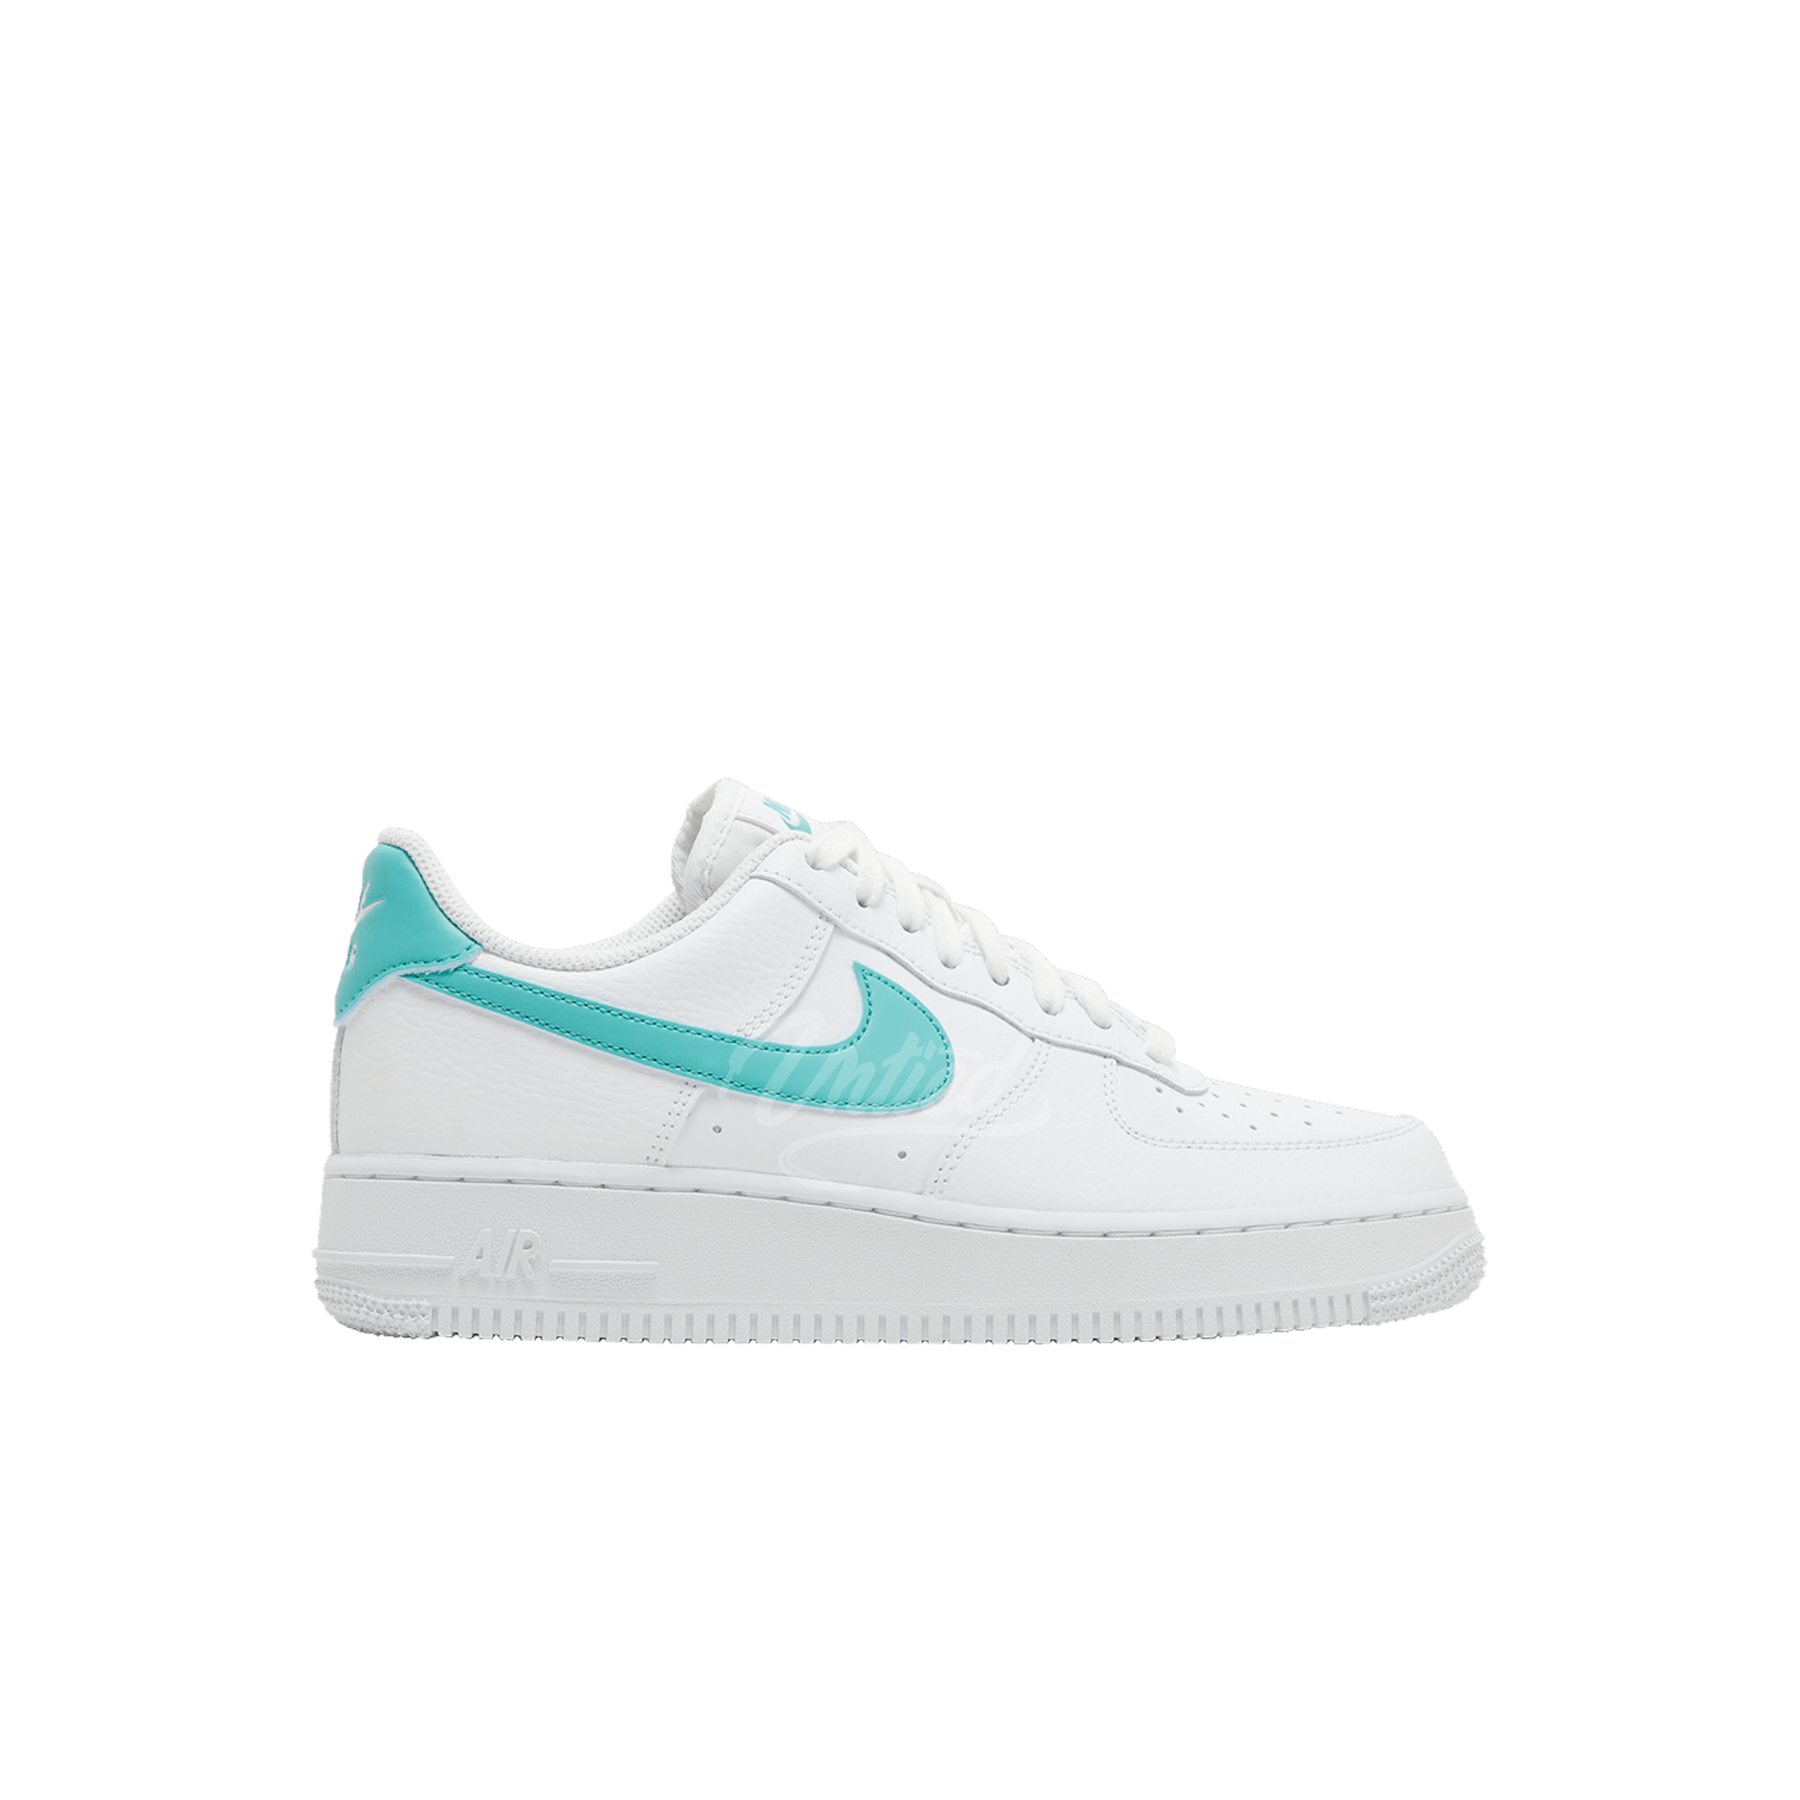 Air Force 1 "White/Washed Teal" (W)